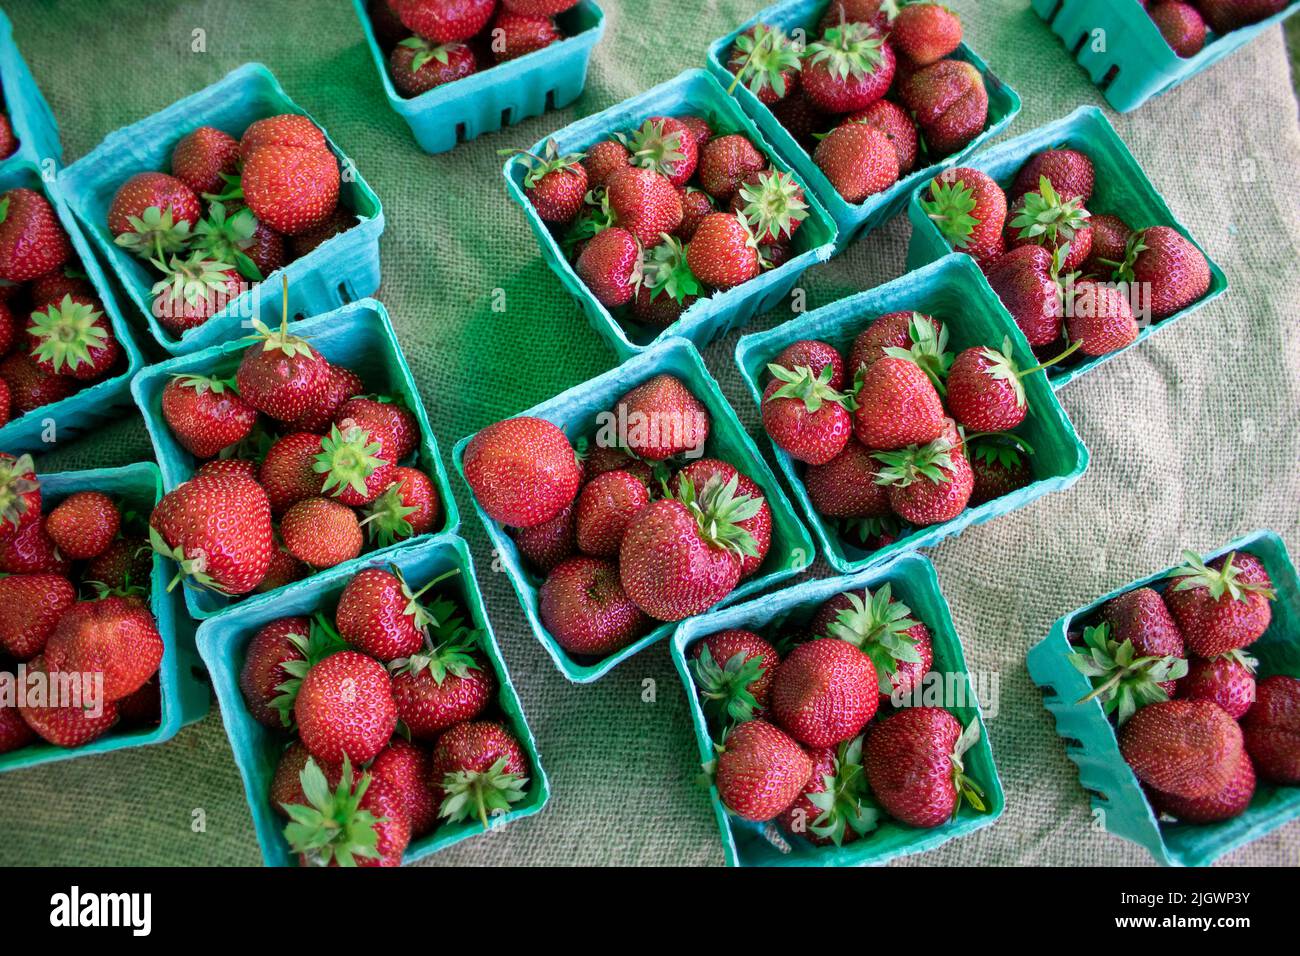 freshly picked strawberries in a teal punnet at a framers market outdoors Stock Photo